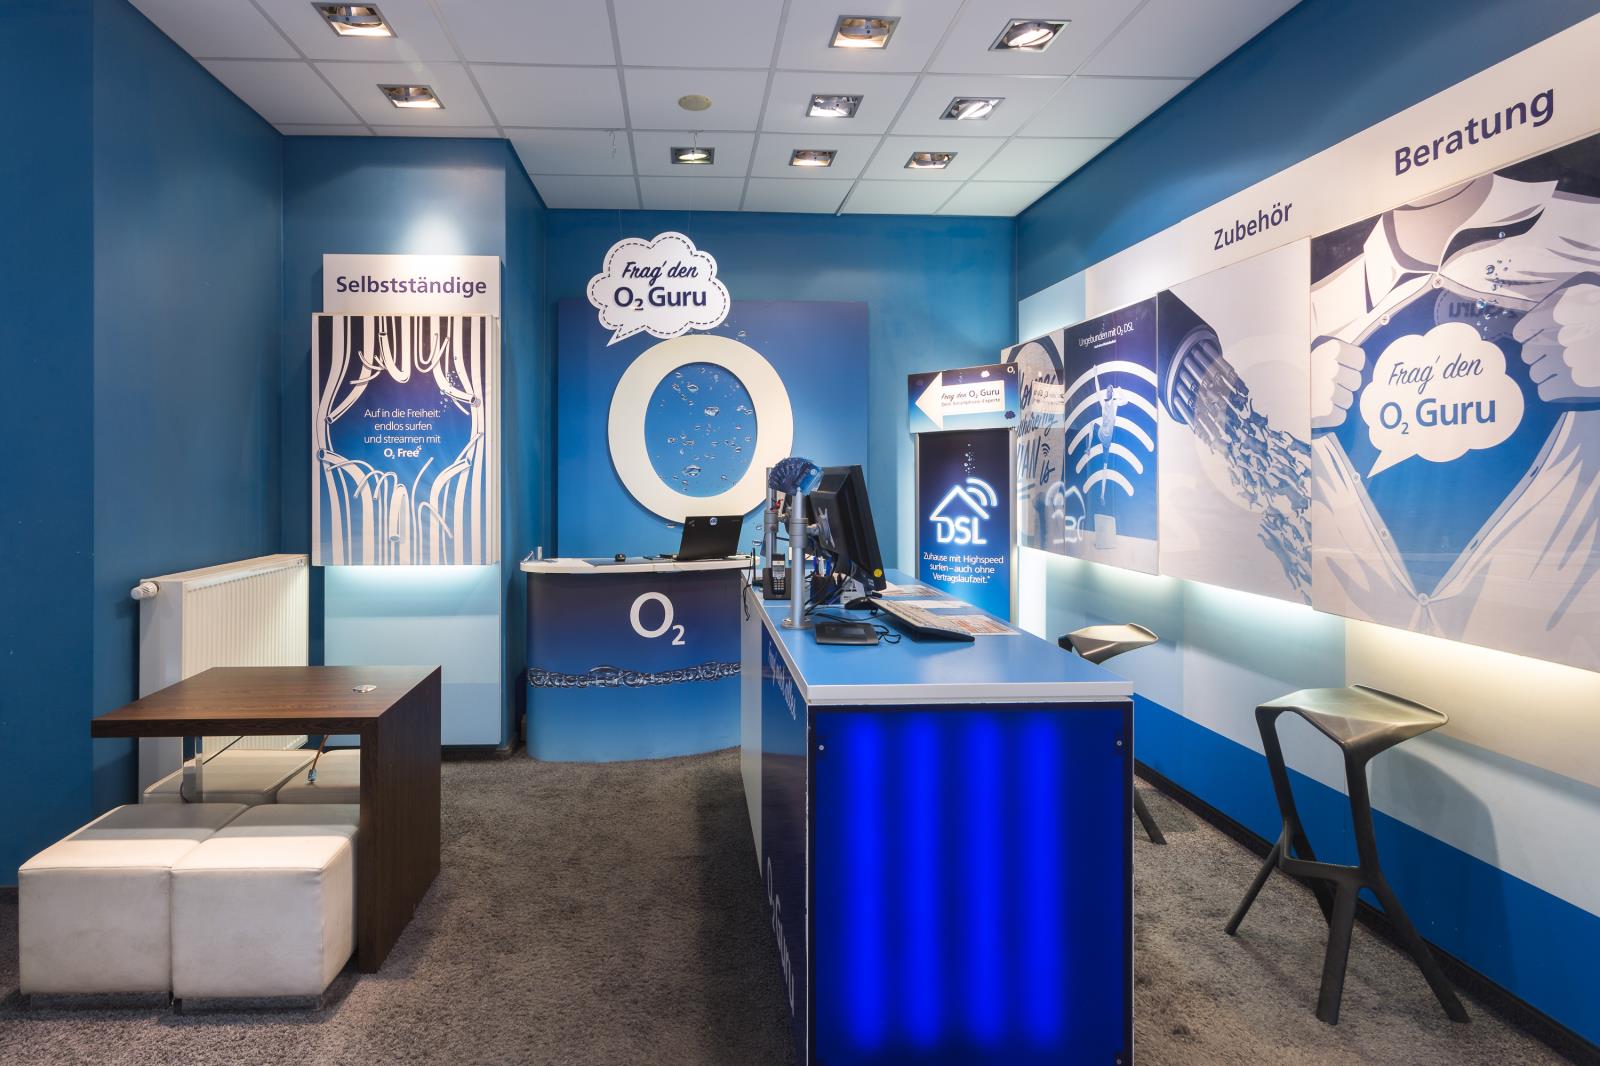 o2 Shop, Lister Meile 74 in Hannover